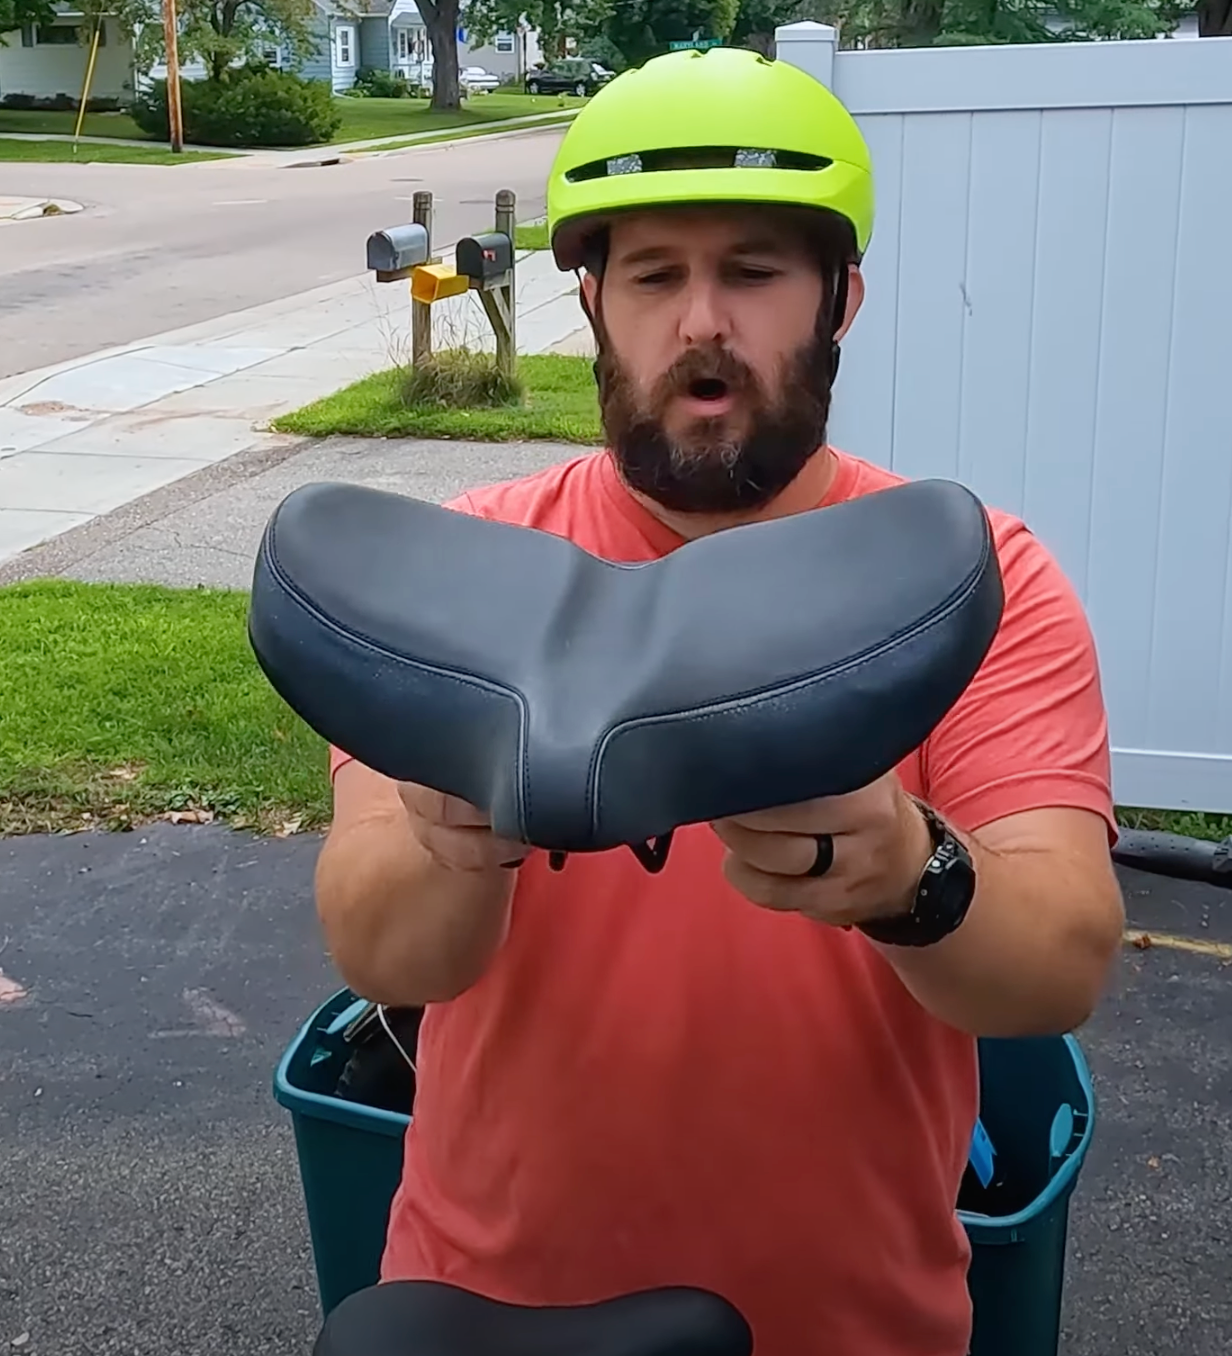 YLG Oversized Comfort Electric Bike Seat